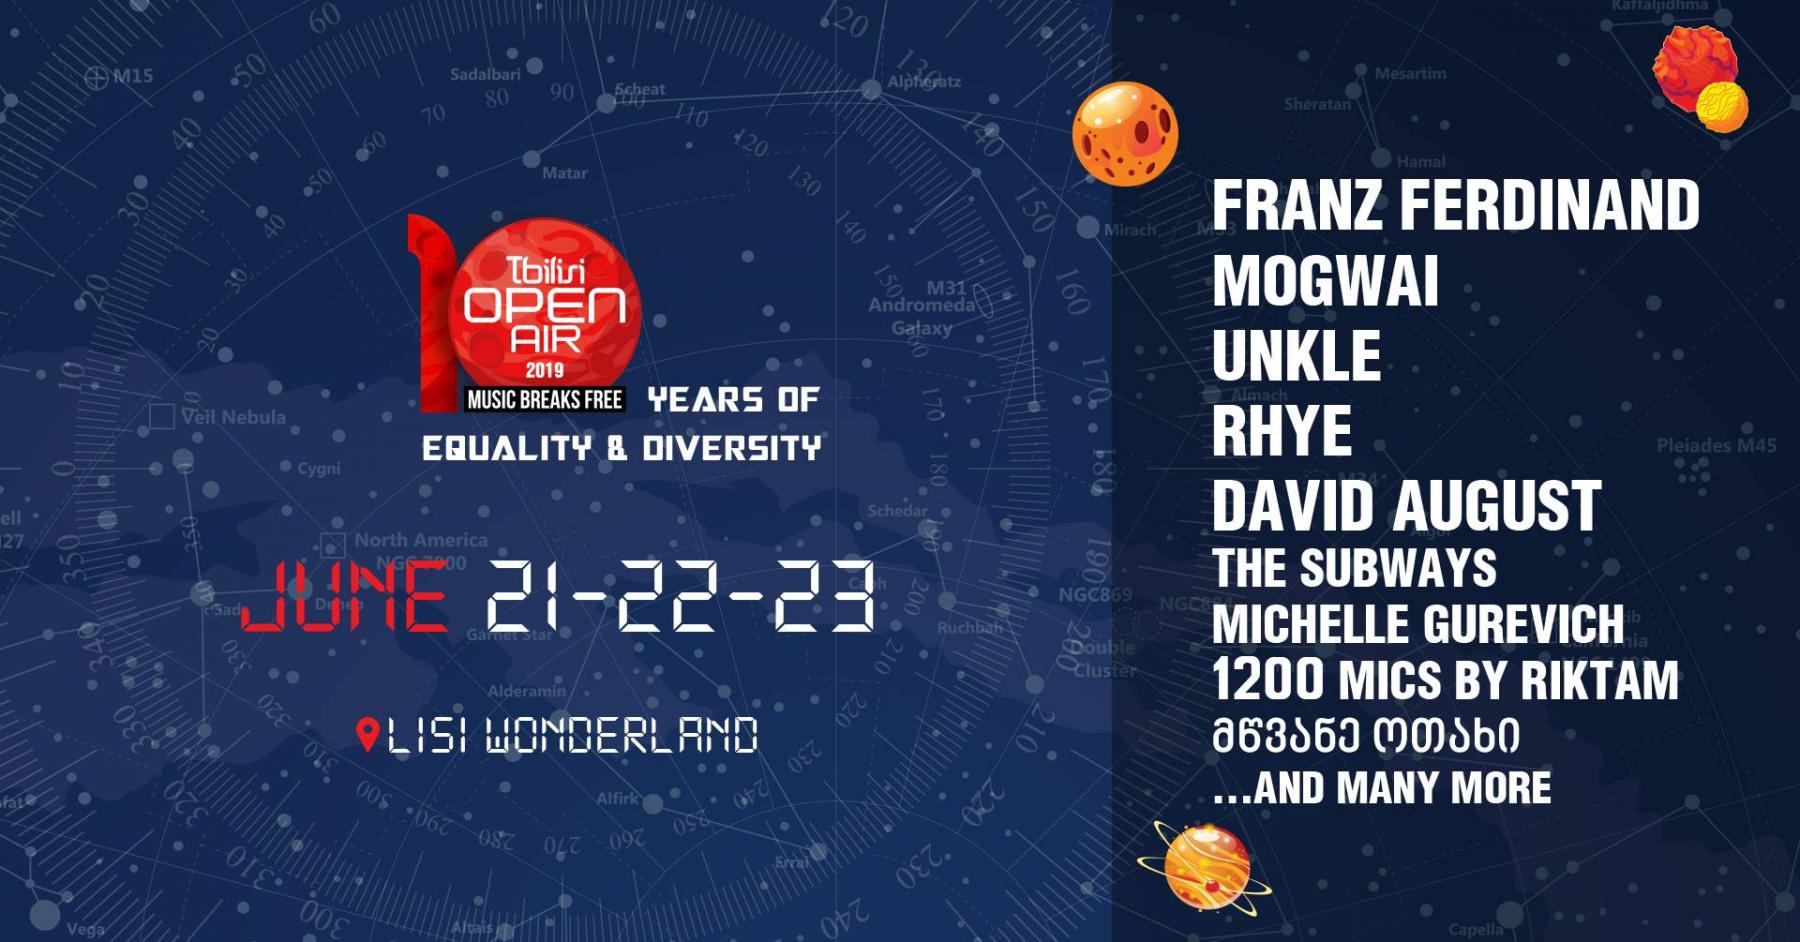 TBILISI OPEN AIR 2019 celebrates its 10th ANNIVERSARY with exciting LINEUP for 2019!